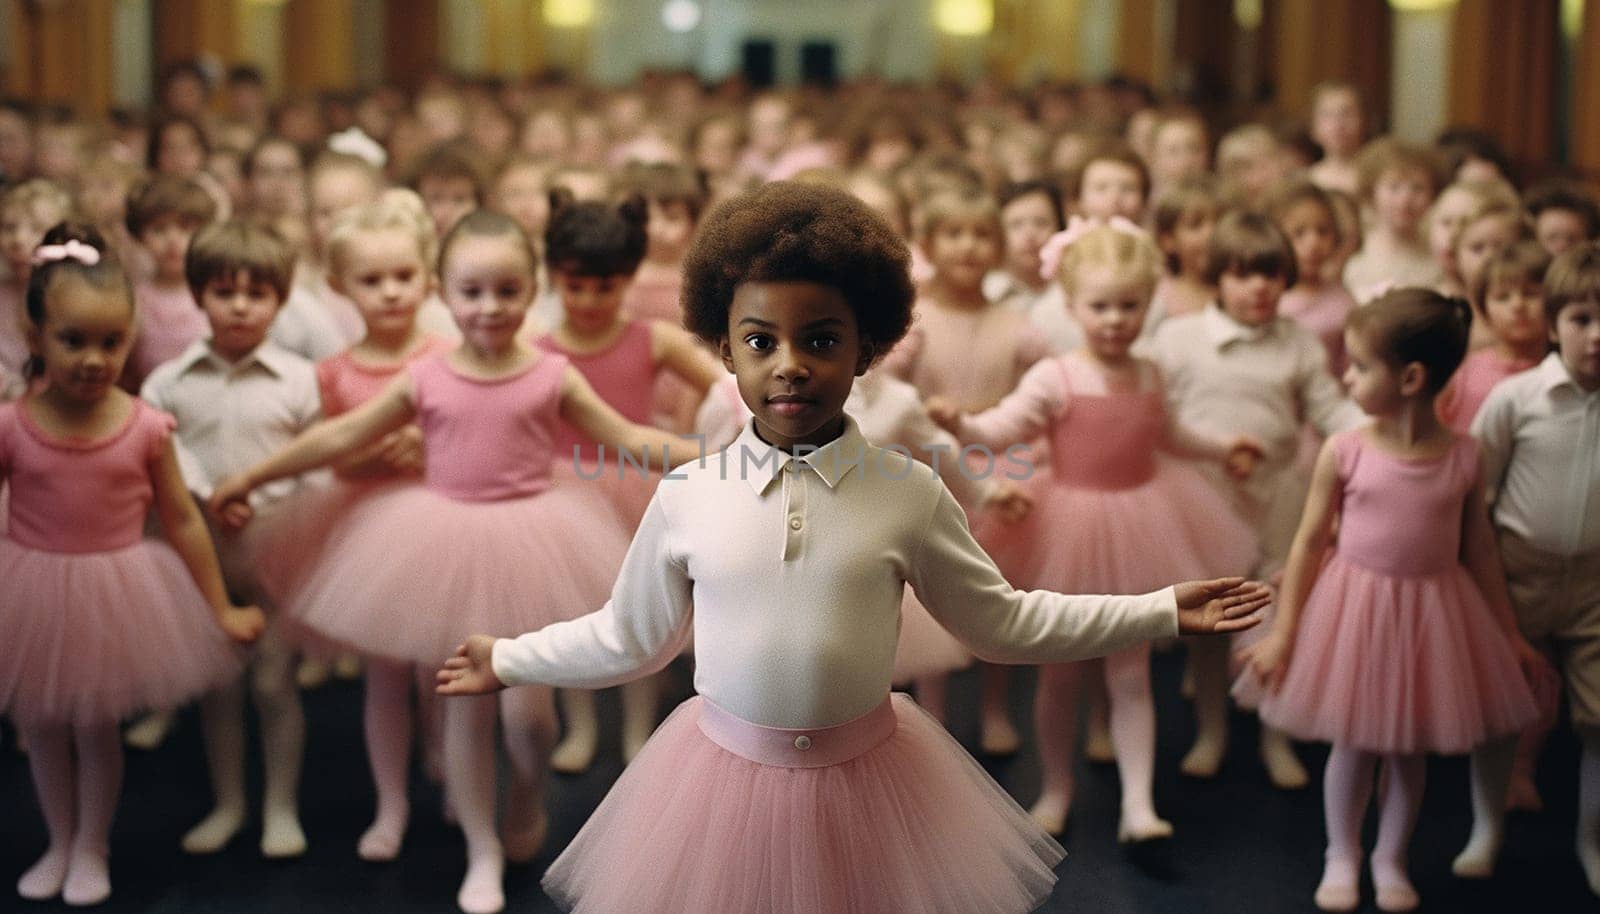 Boy wearing pink tutu skirt and having fun at ballet class with girls on the background. ballet class performance in a studio dancing and learning cute